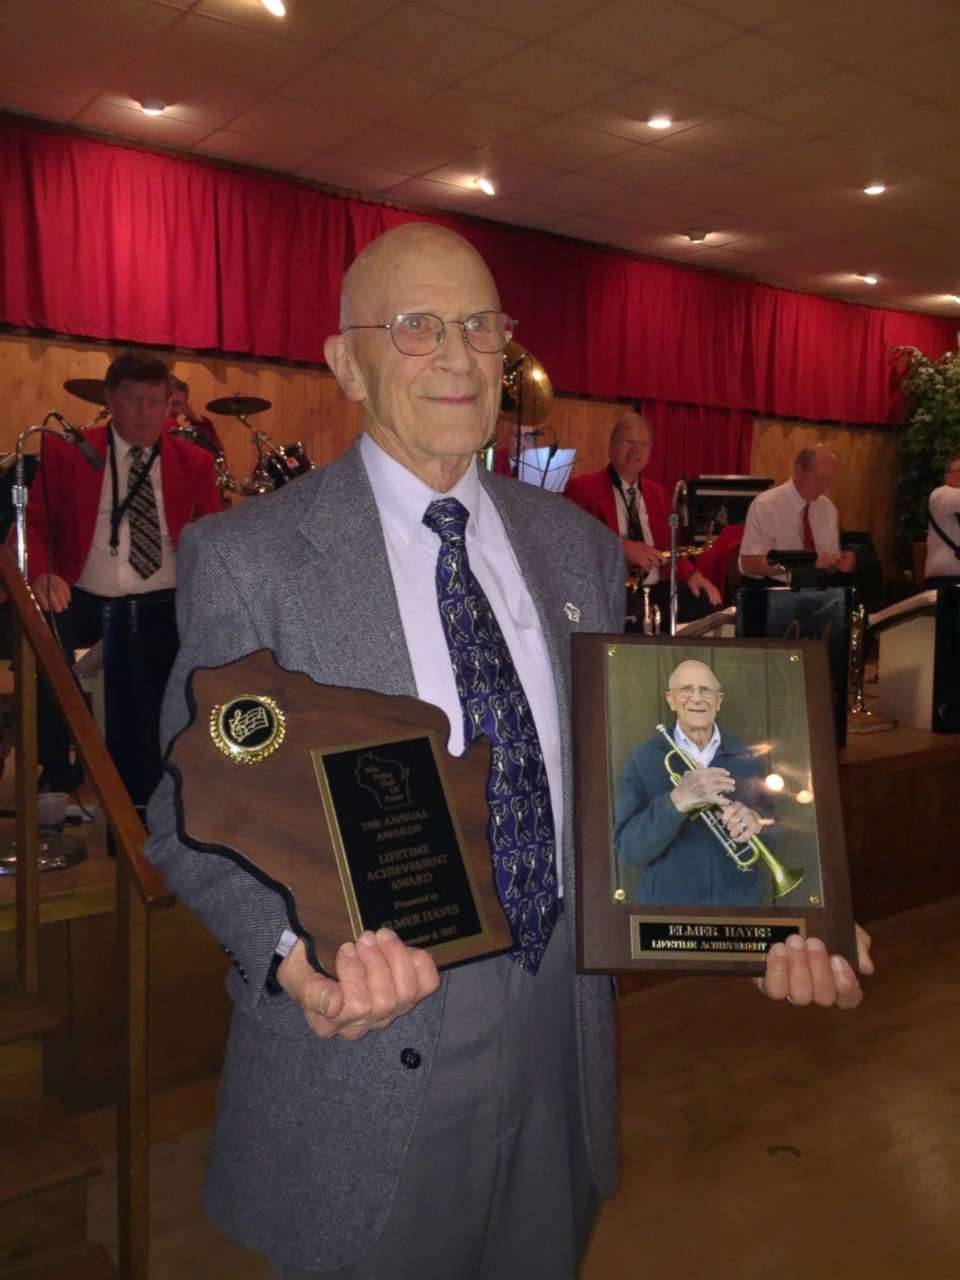 PHOTO: Elmer Hayes was awarded the Lifetime Achievement Award from the Wisconsin Polka Hall of Fame, a nonprofit organization.